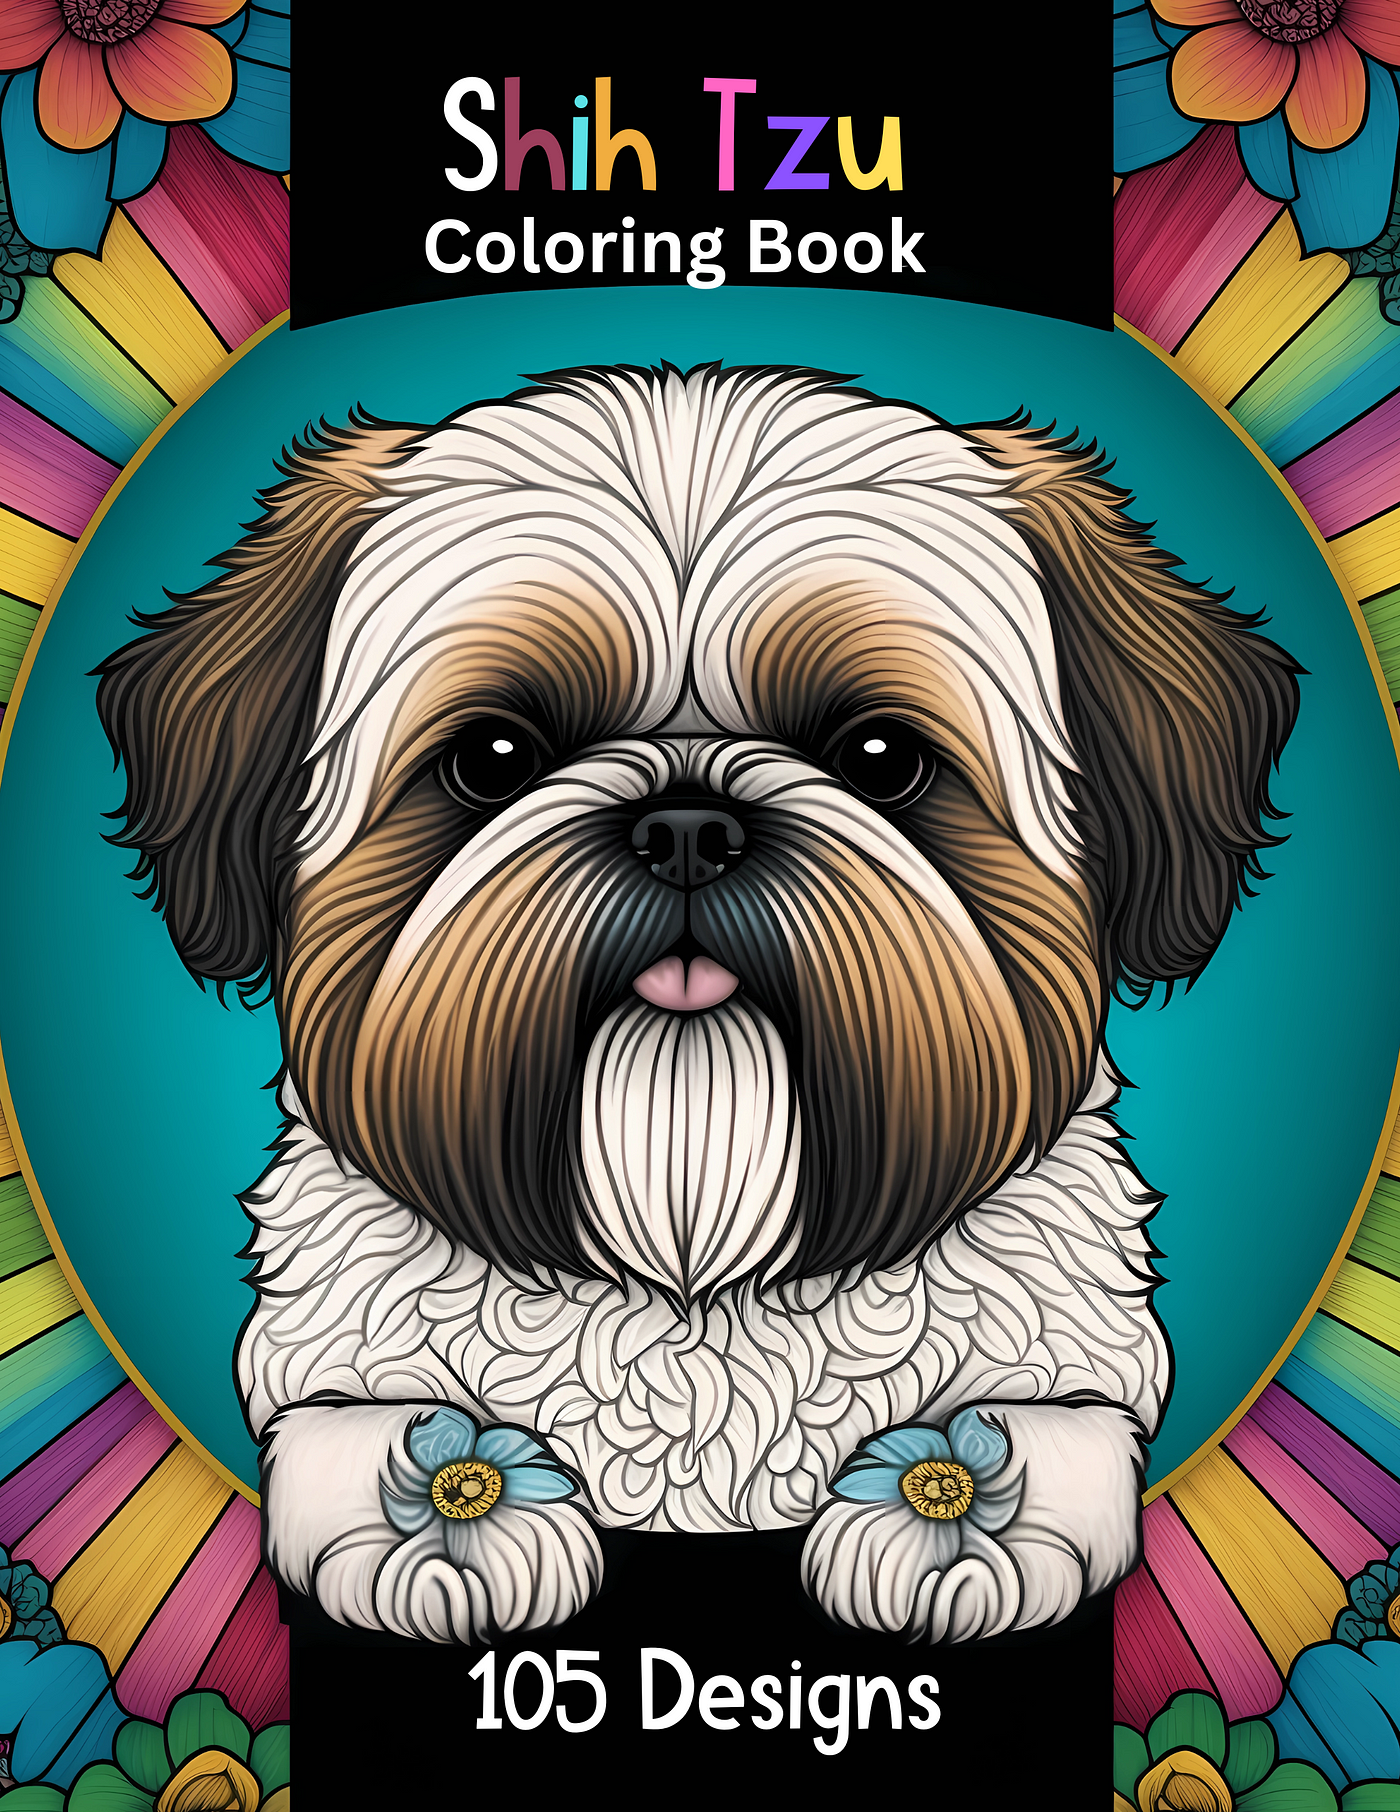 Blissful Nature Mindfulness coloring Books for Adults